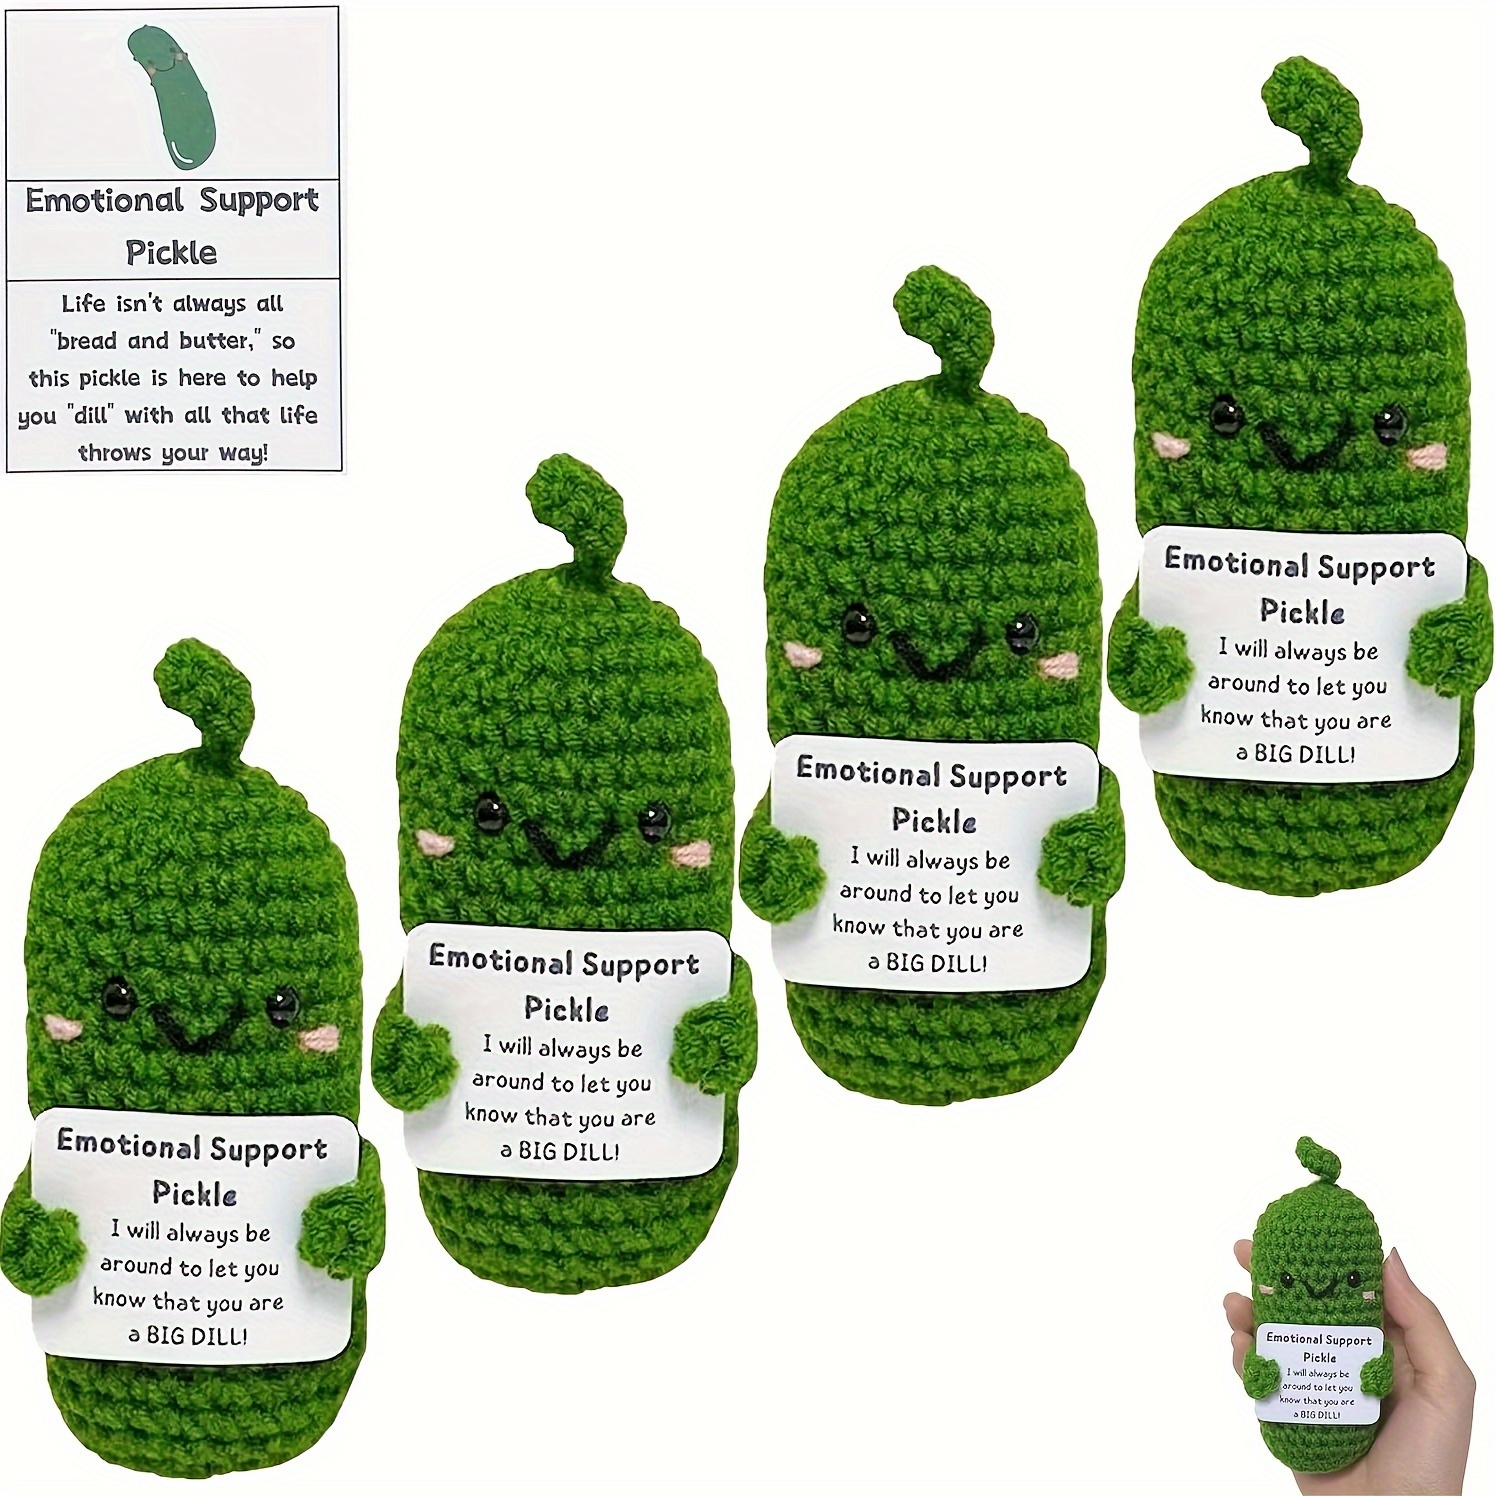  FauKait Emotional Support Pickled Cucumber Gift,Handmade  Emotional Support Pickle Cucumber, Cute Positive Pickle Crochet Knitting  Doll Ornaments, Funny Reduce Pressure Pickle Toy (Cucumber1) : Toys & Games